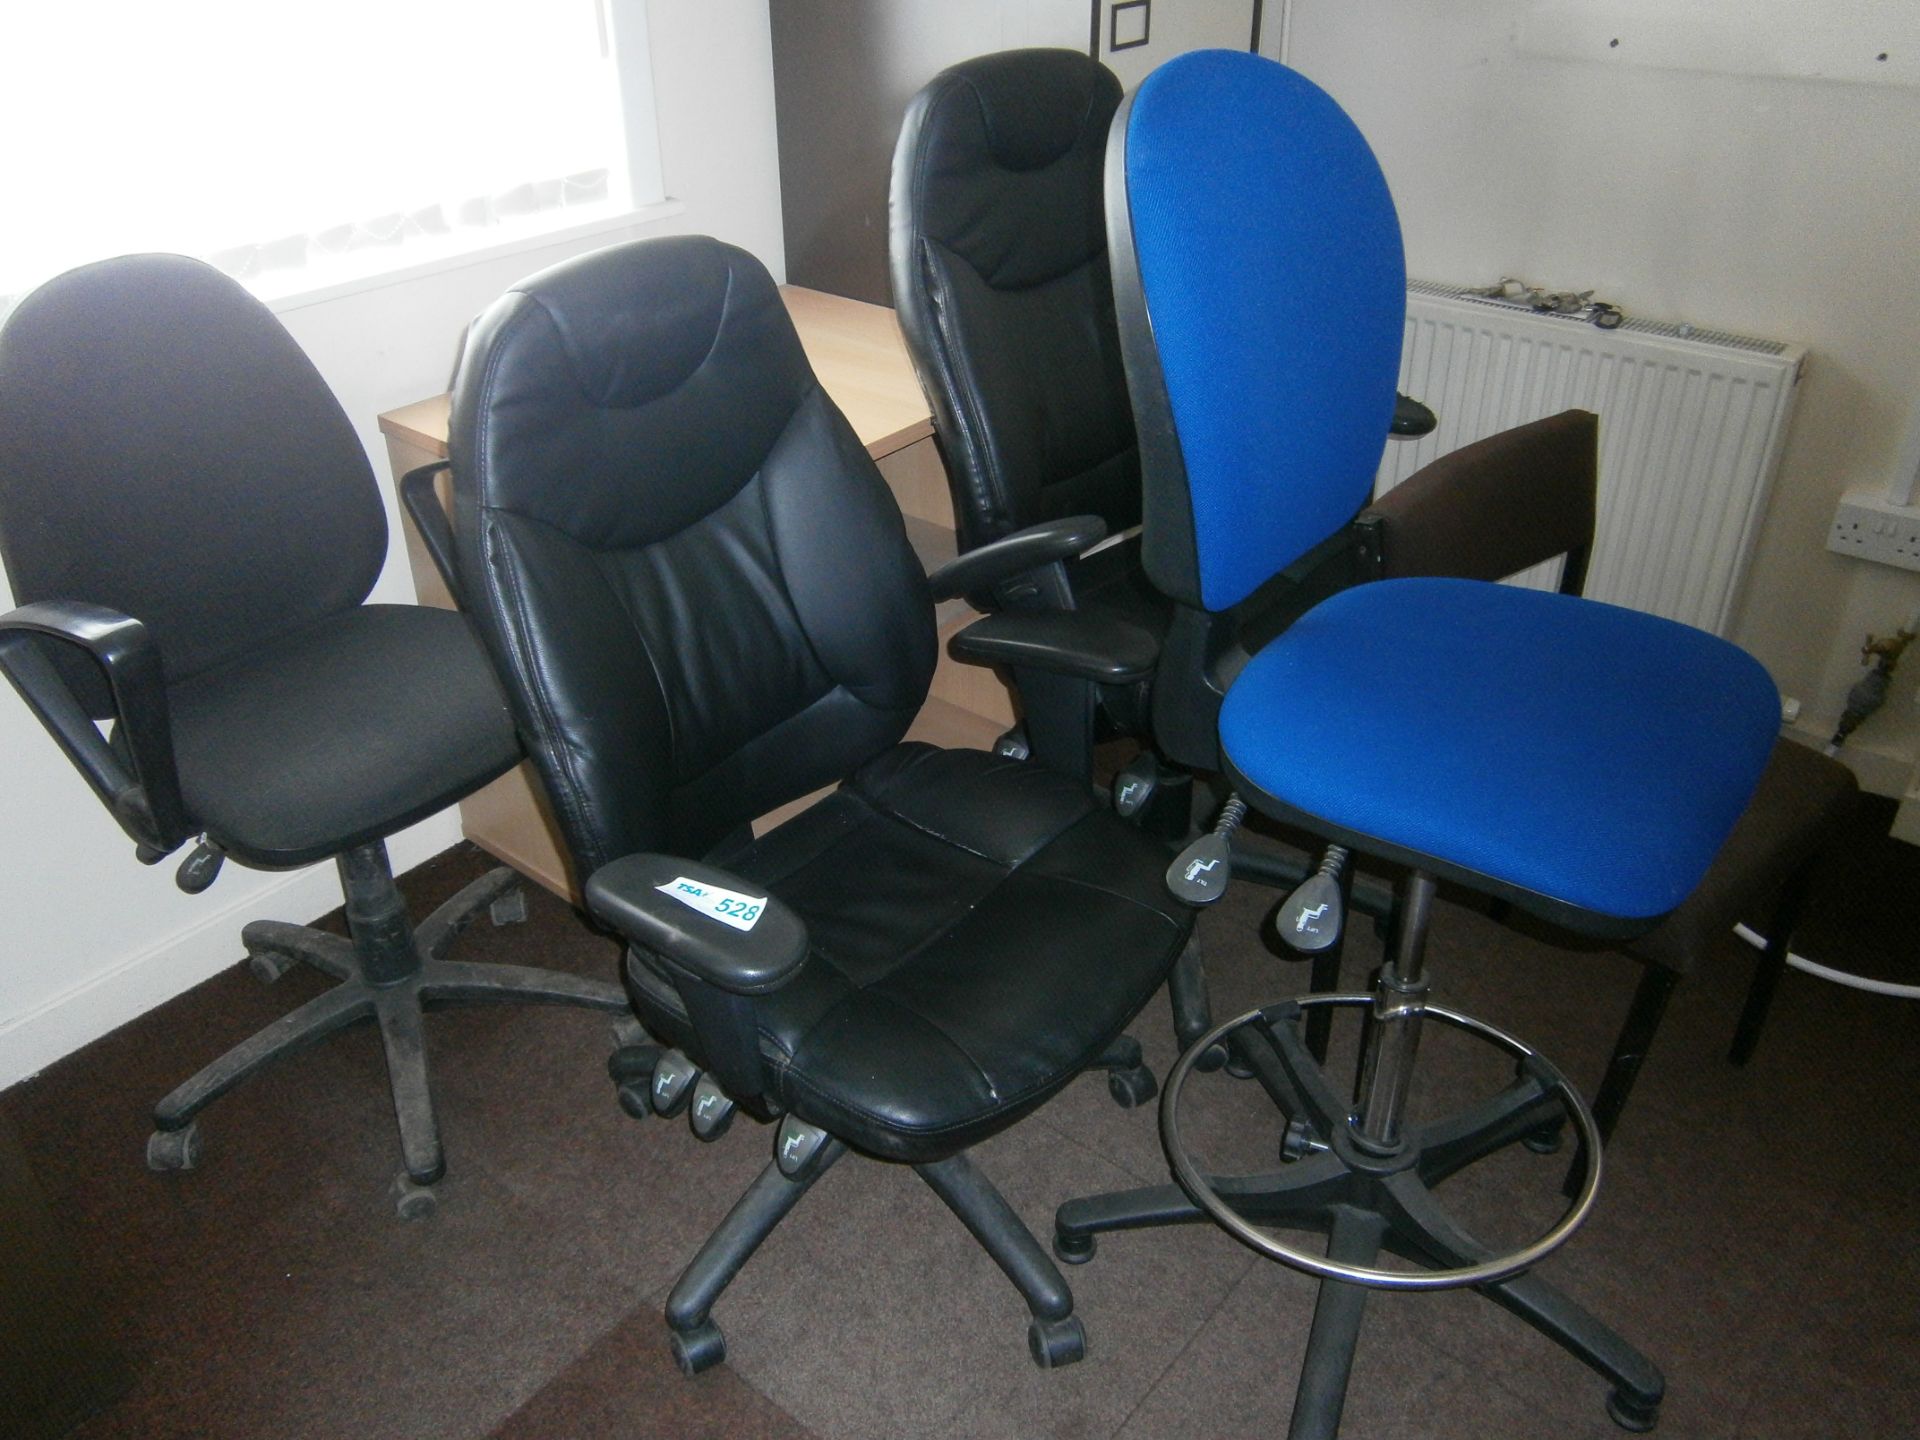 5 No. Various Office Chairs